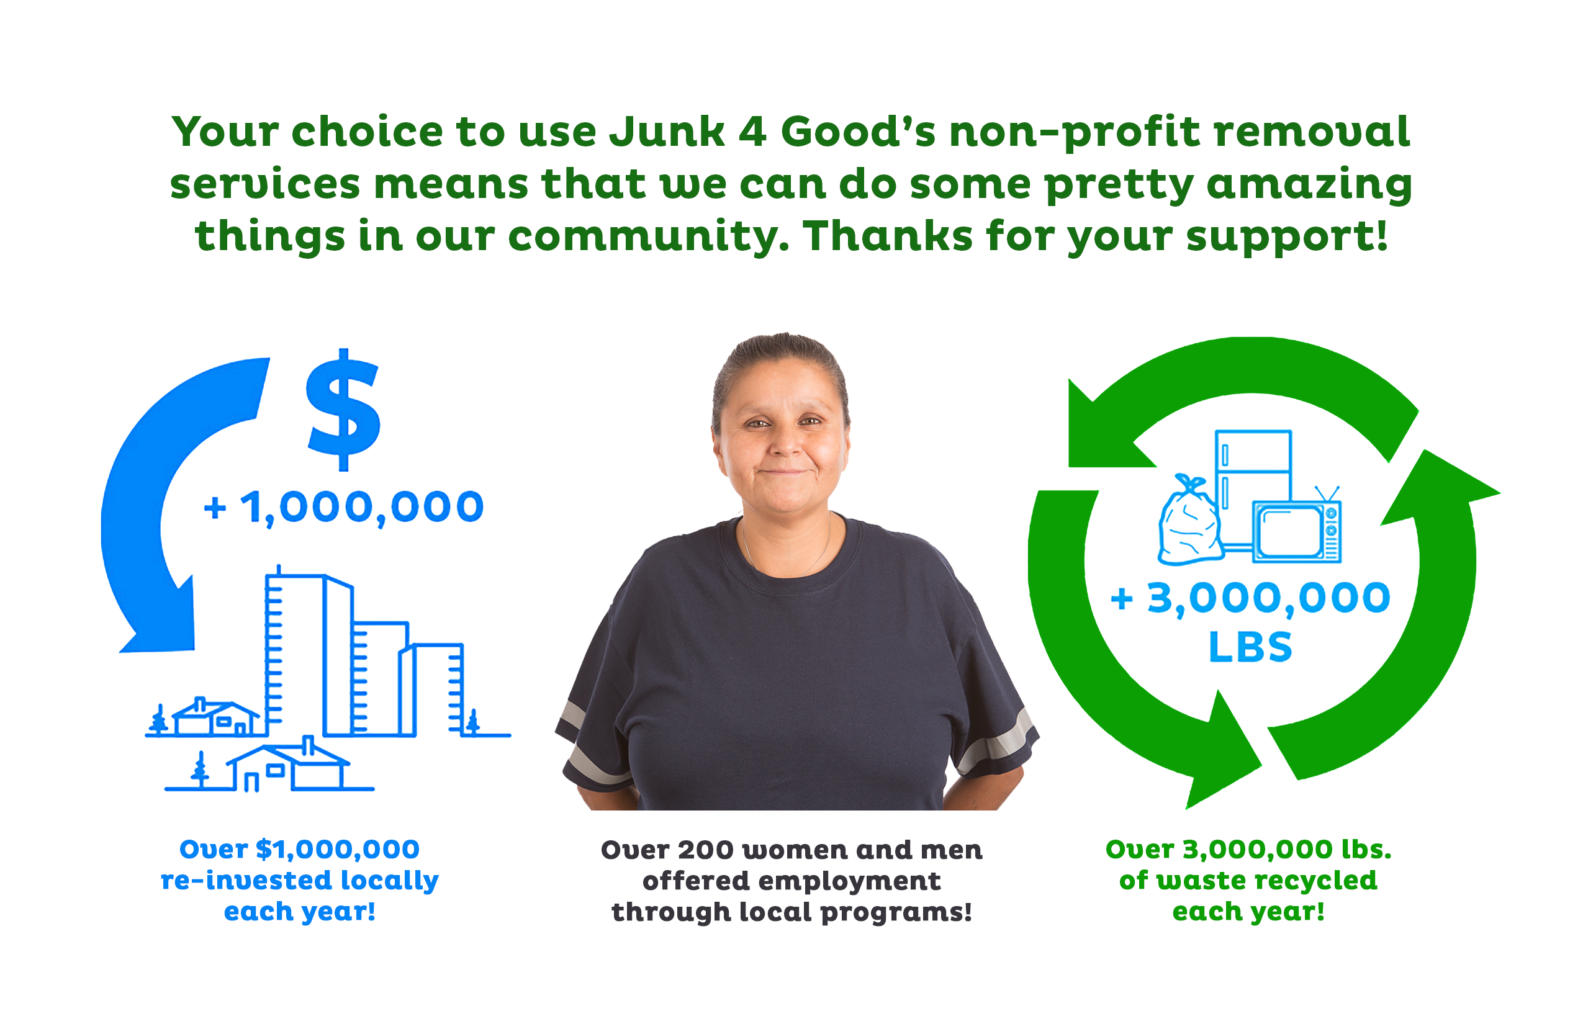 Learn how Junk 4 Good gives back to the local community